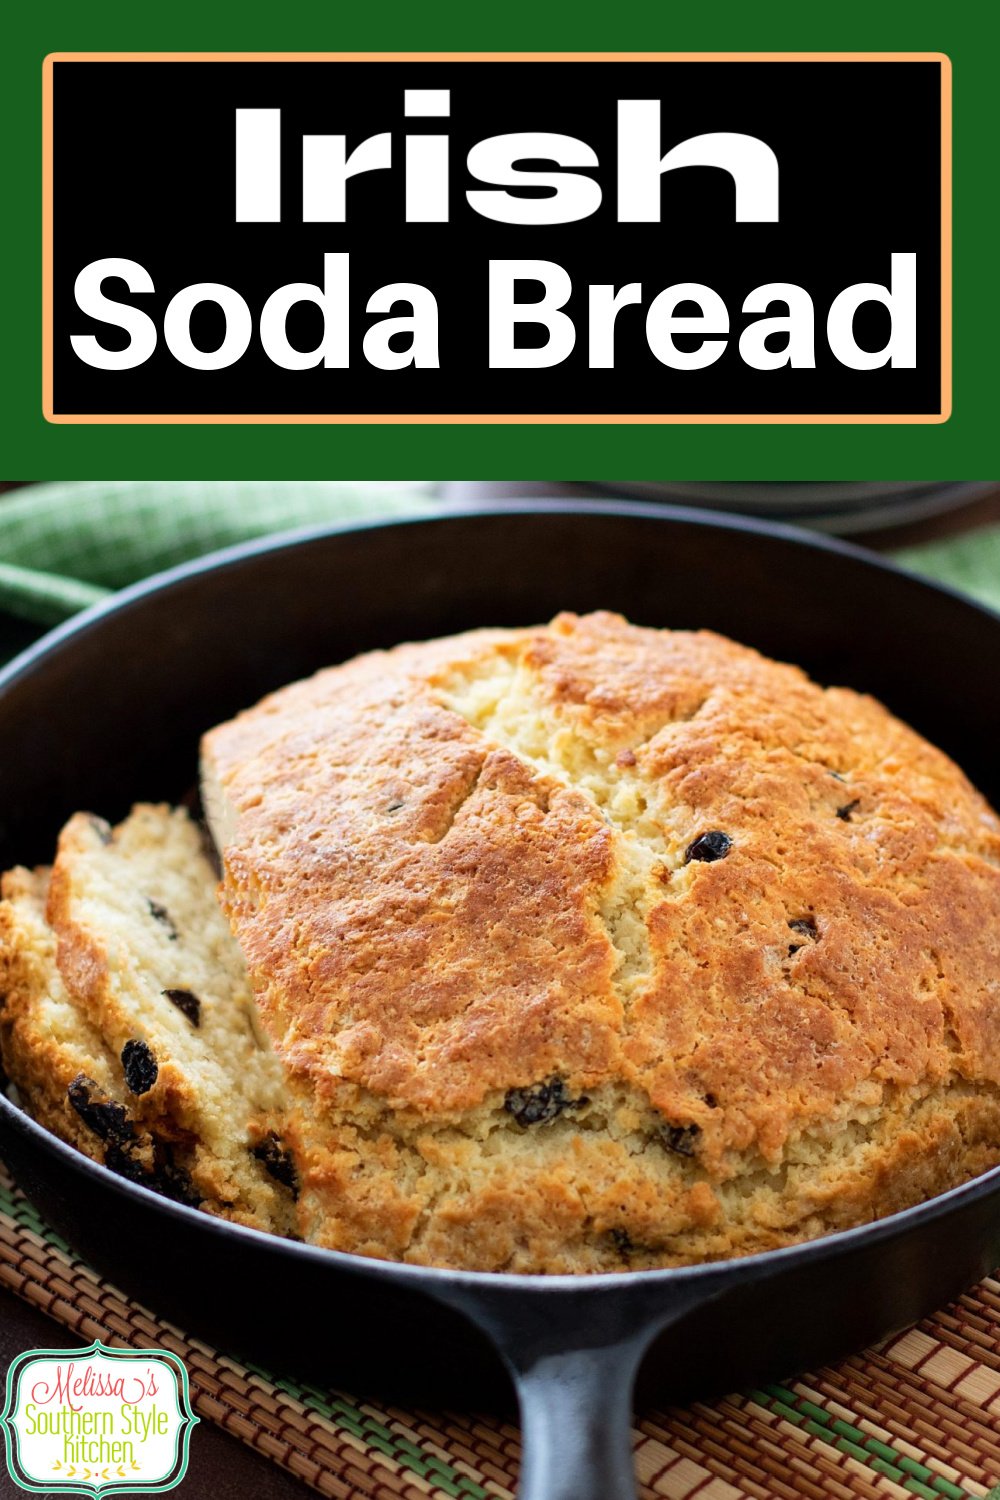 Enjoy a loaf of freshly baked Irish Soda Bread with soup, stew or corned beef and cabbage for St Patrick's Day #sodabread #irishsodabread #breadrecipes #easysodabreadrecipe #stpatricksday #southernrecipes #bread via @melissasssk